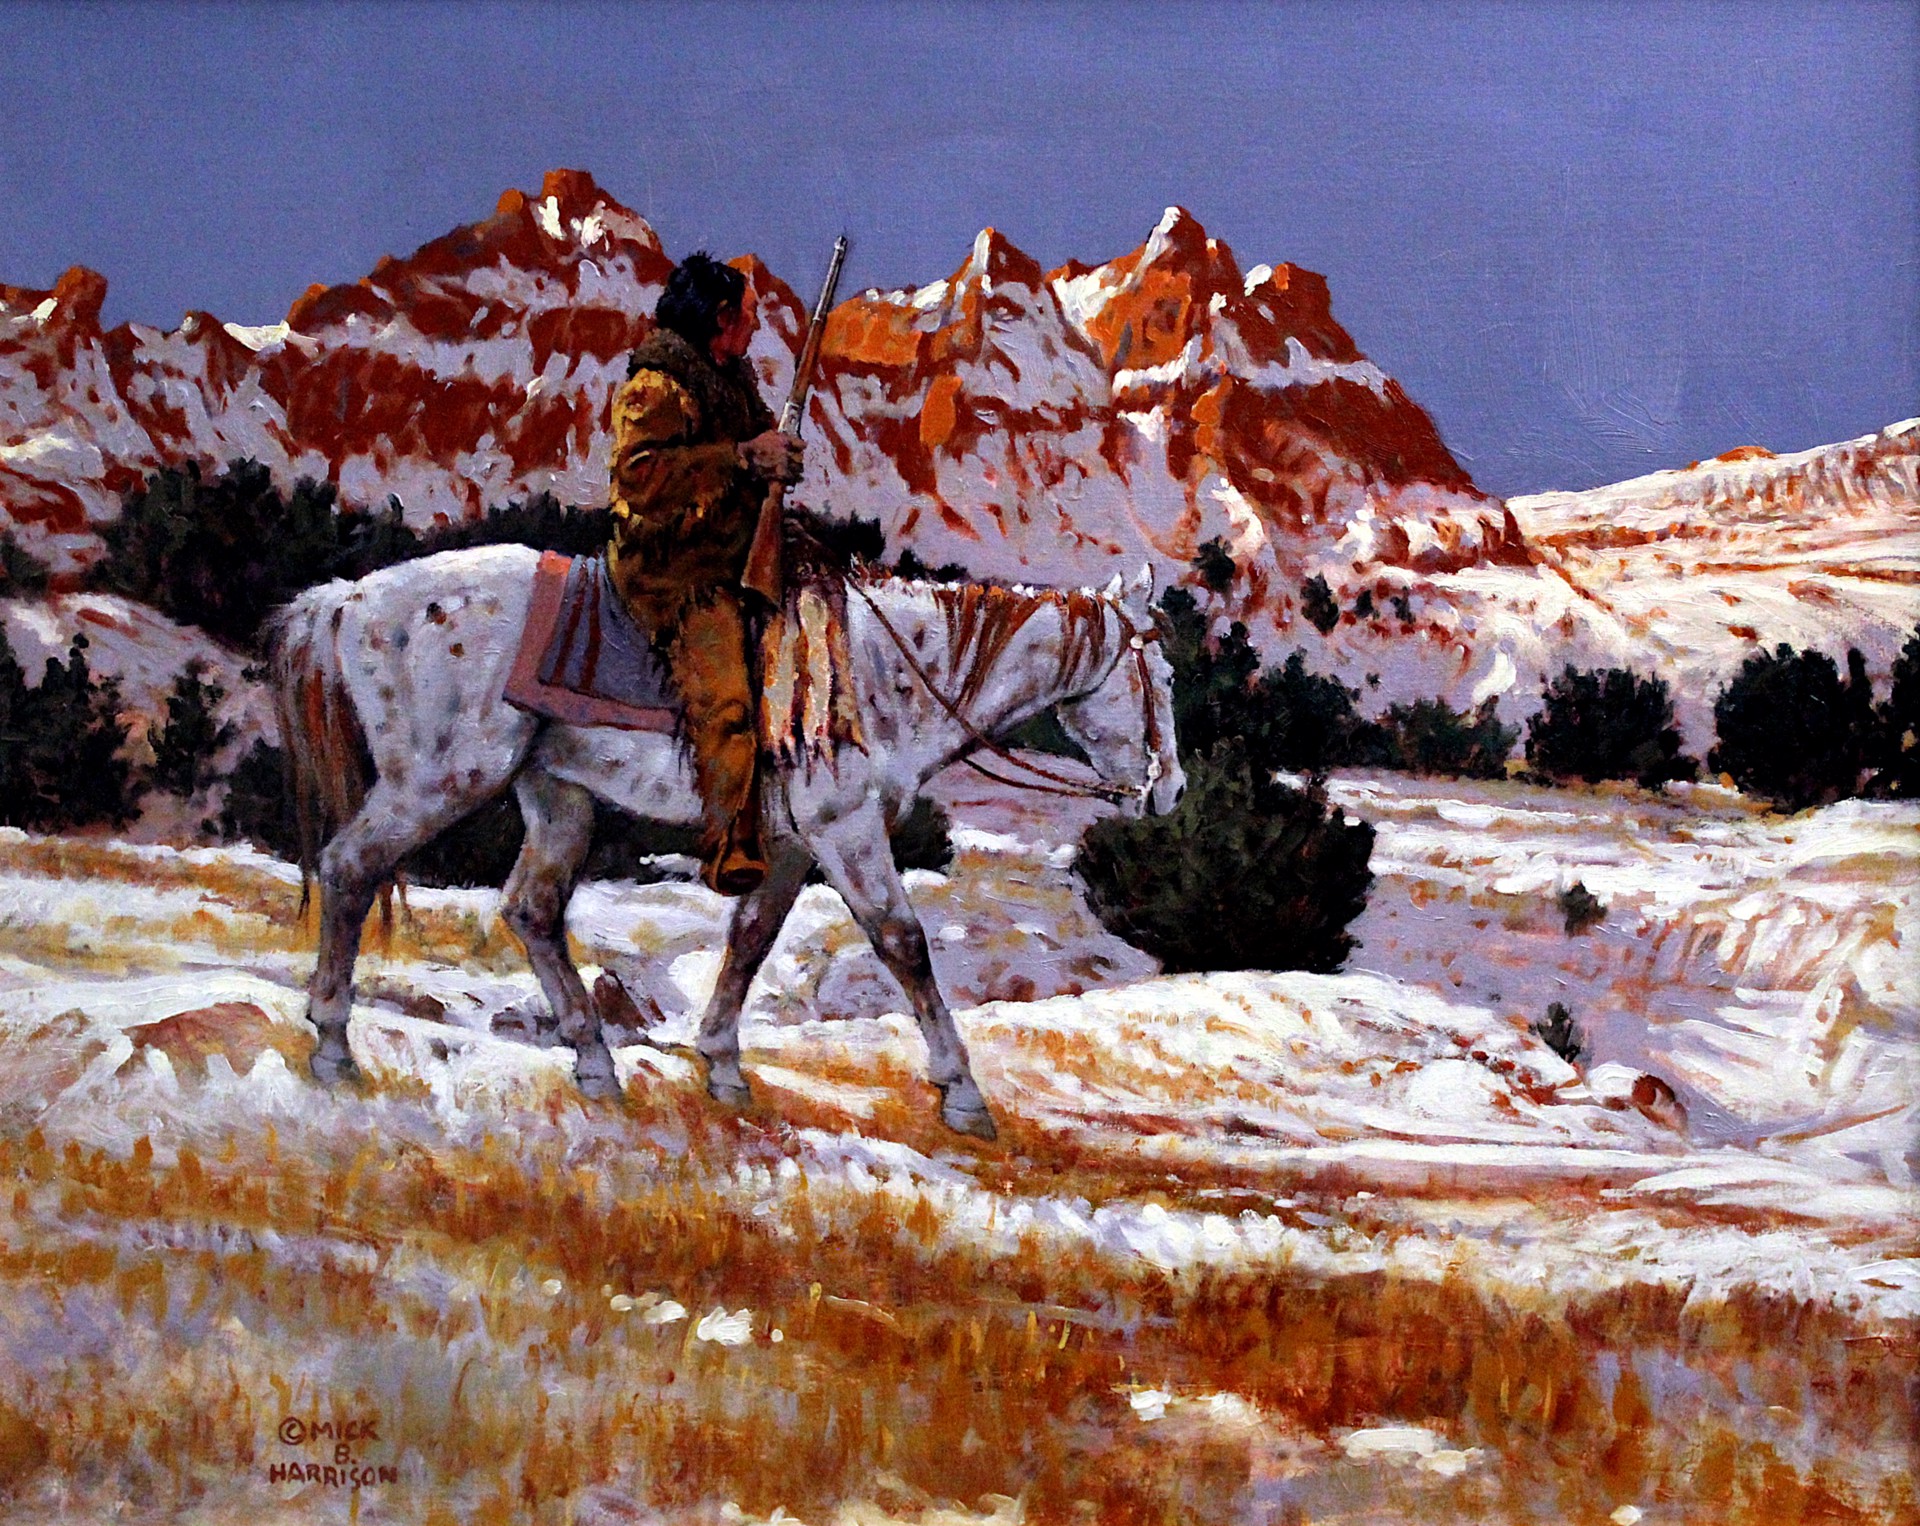 Bounty Of The Badlands by Mick B Harrison